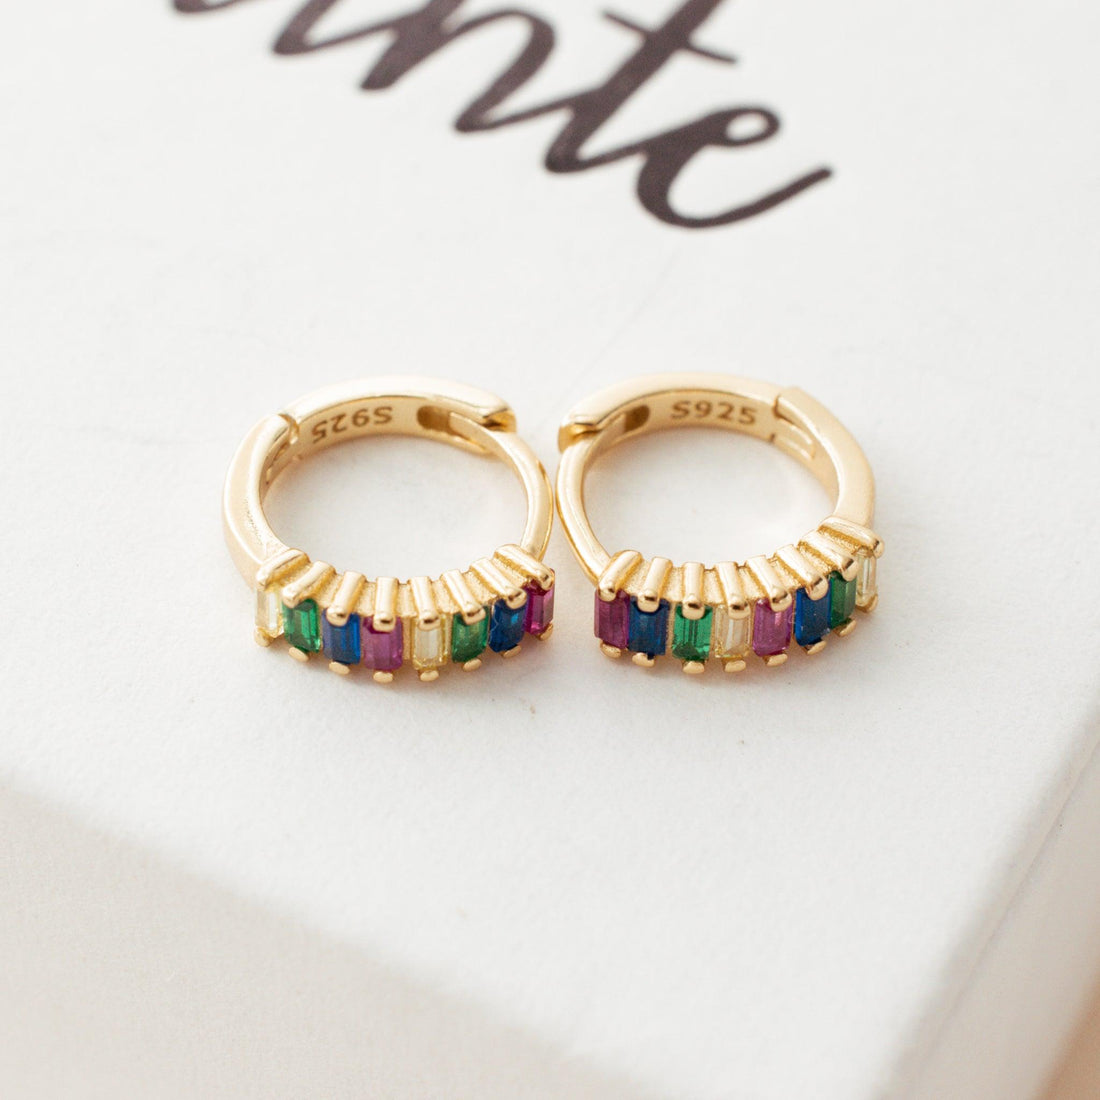 Multicolor Crystal Hoop Earrings photo shows a huggie earring with multicolor crystal and the S925 mark on a white background